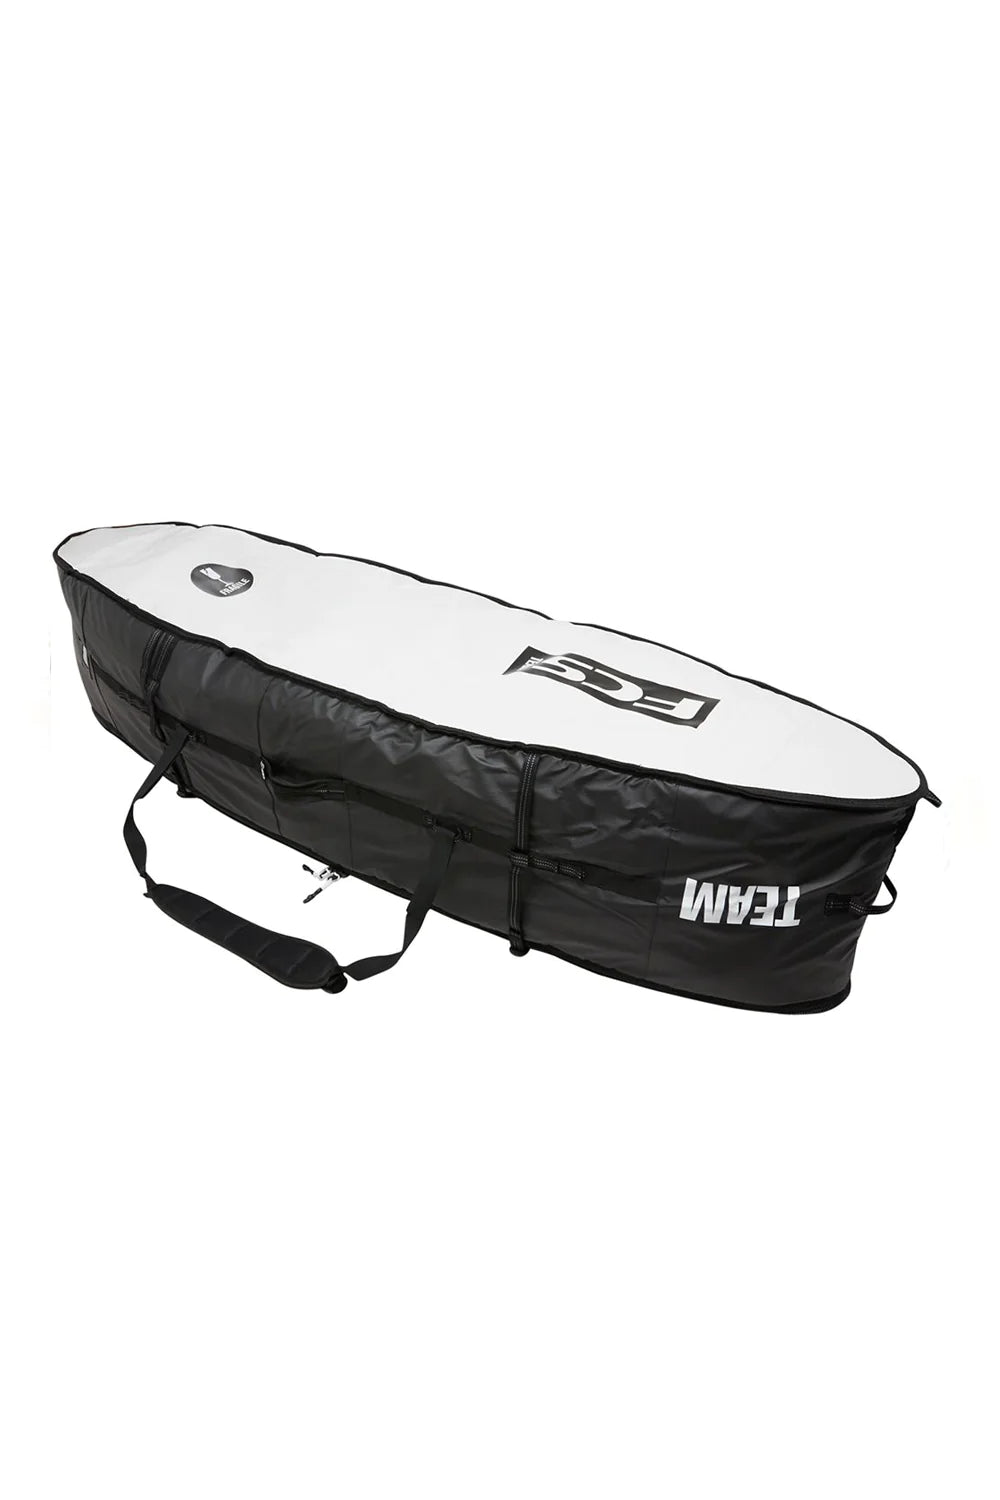 FCS Team 5 All Purpose Travel Cover